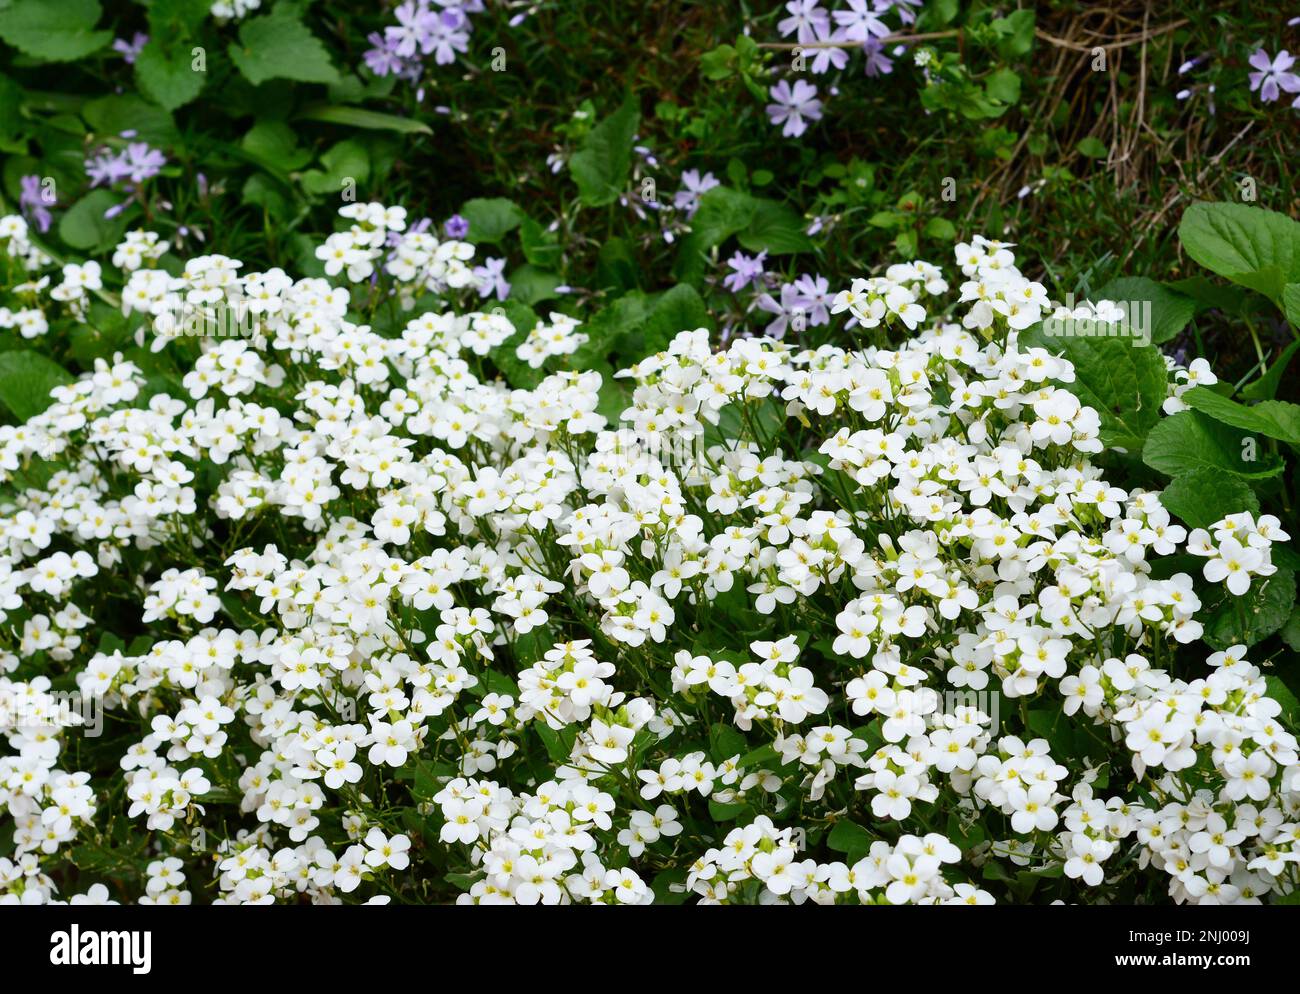 Arabis caucasica is a species of flowering plant in the mustard family (Brassicaceae) known by the common names garden arabis, mountain rock cress or Stock Photo